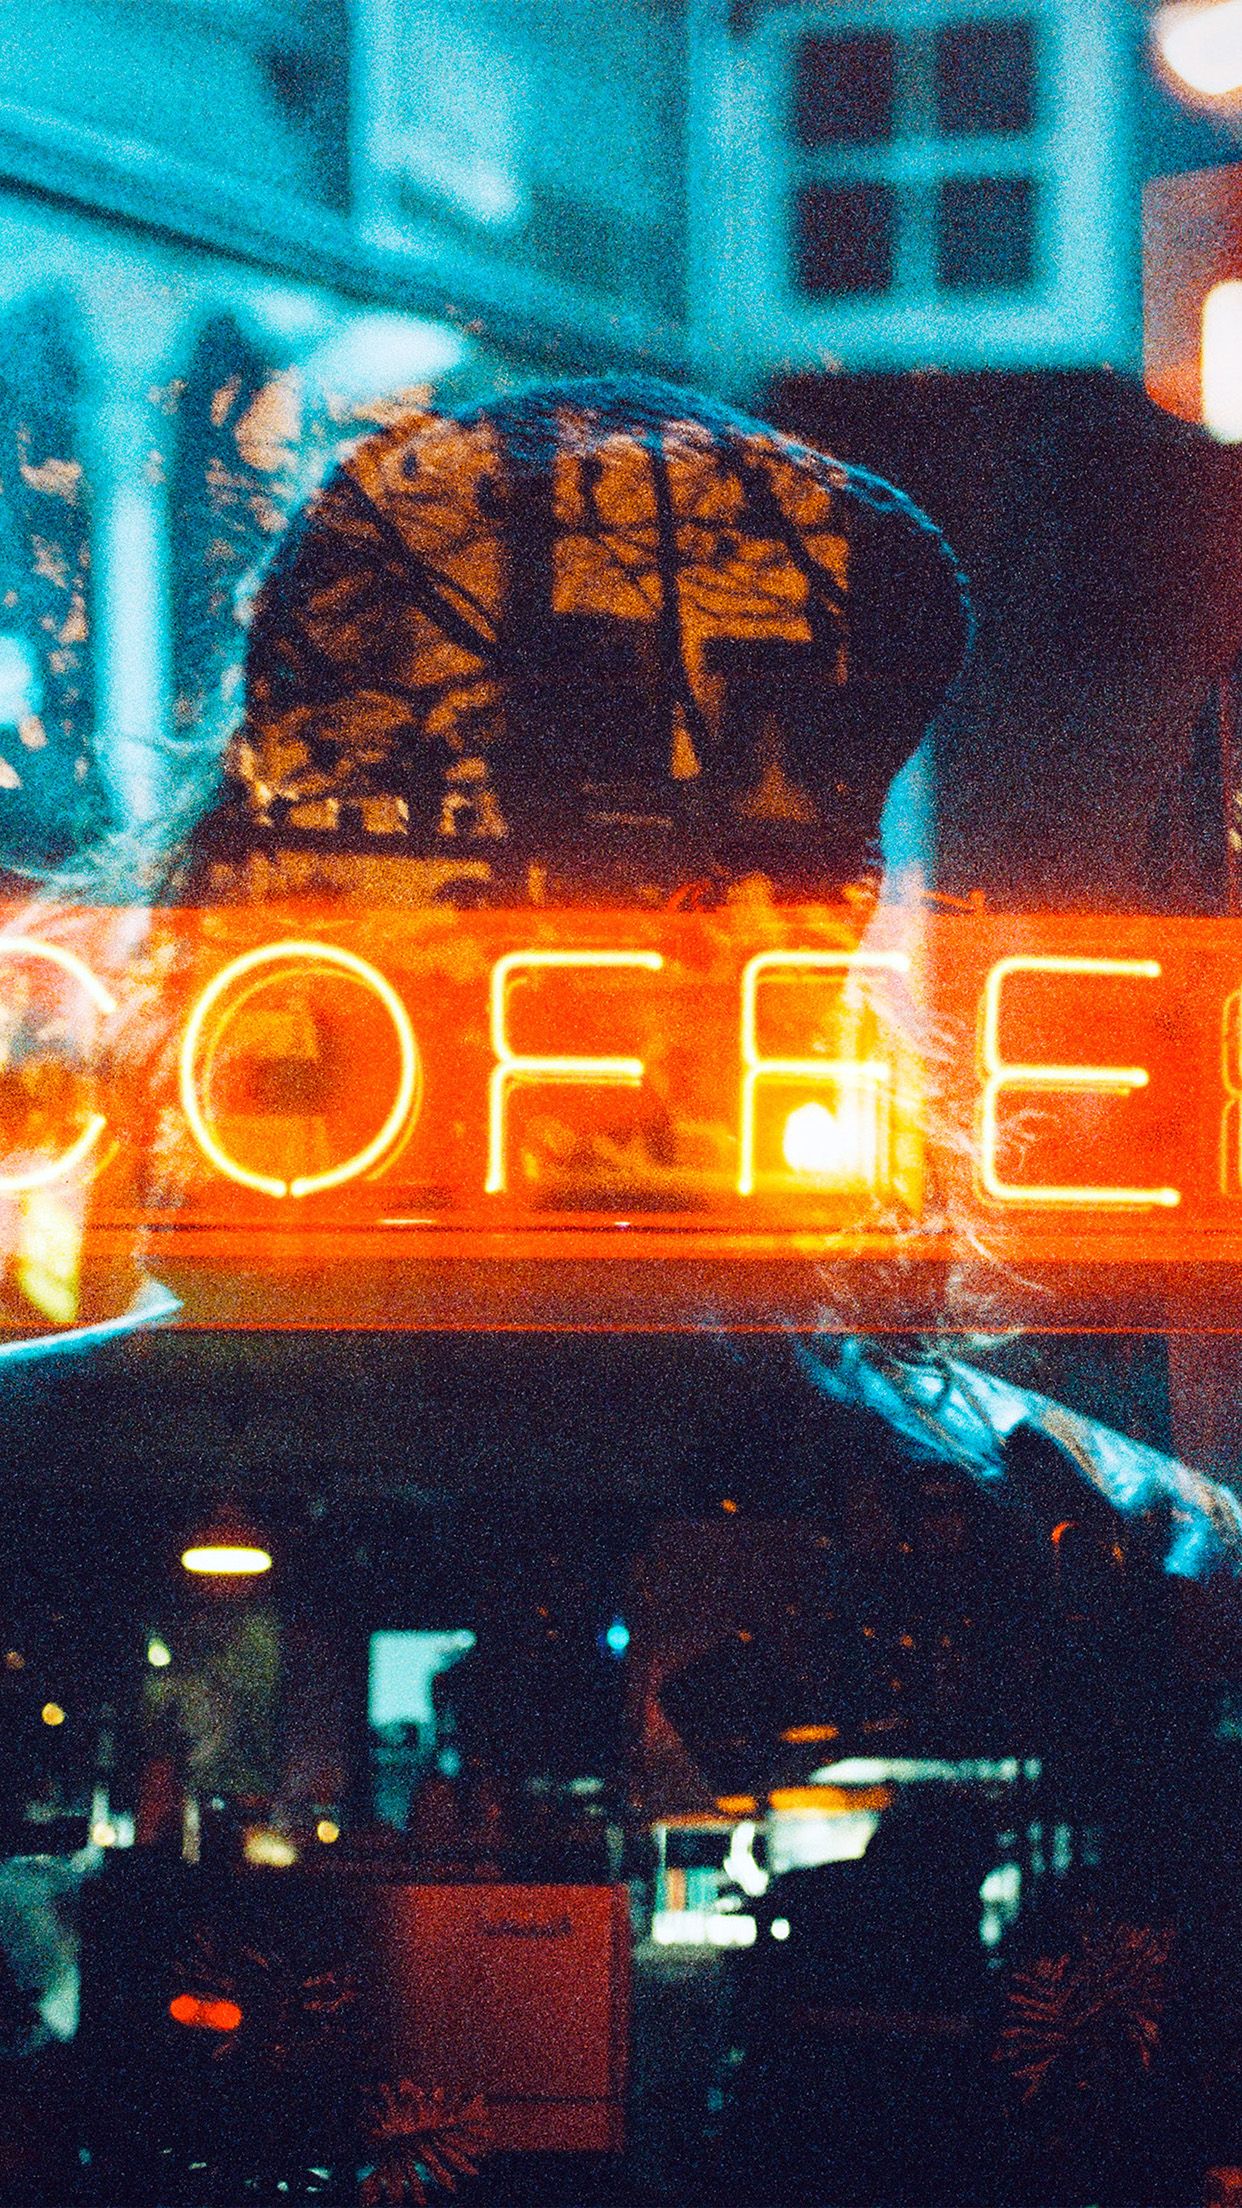 A neon sign that says coffee in red and blue - Neon orange